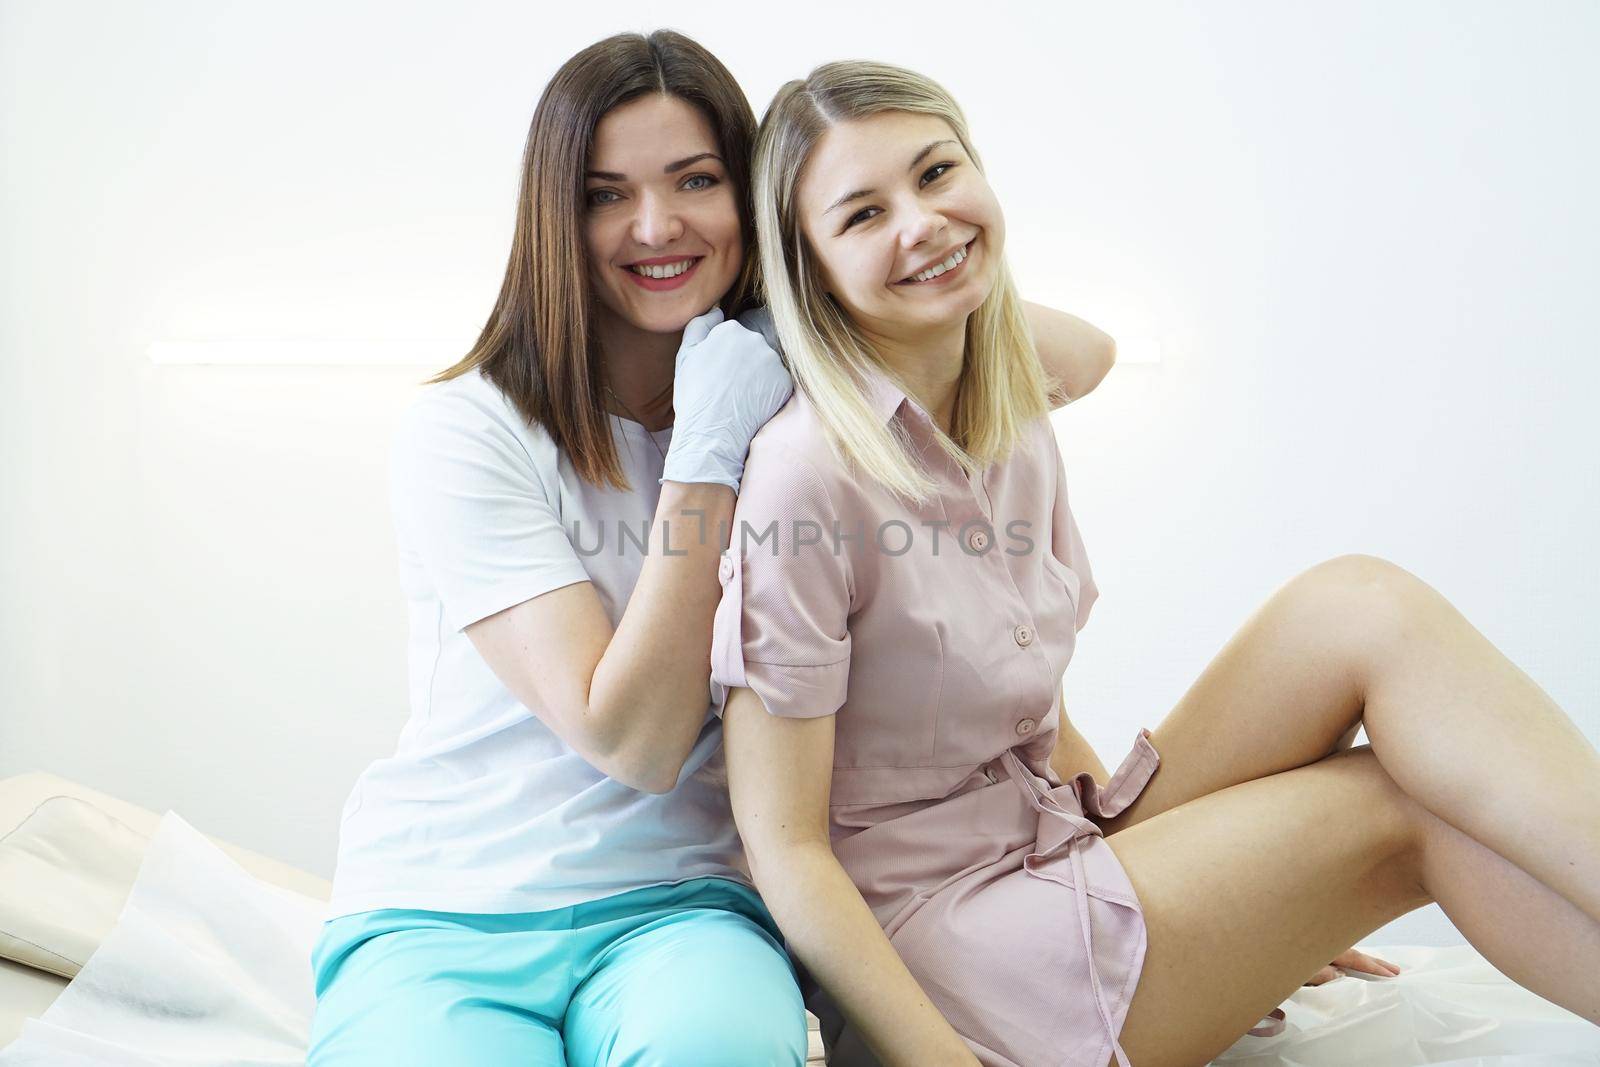 Happy beauty salon master and patient. Body and health care female health concept. Happy patient sitting on a couch and smiling